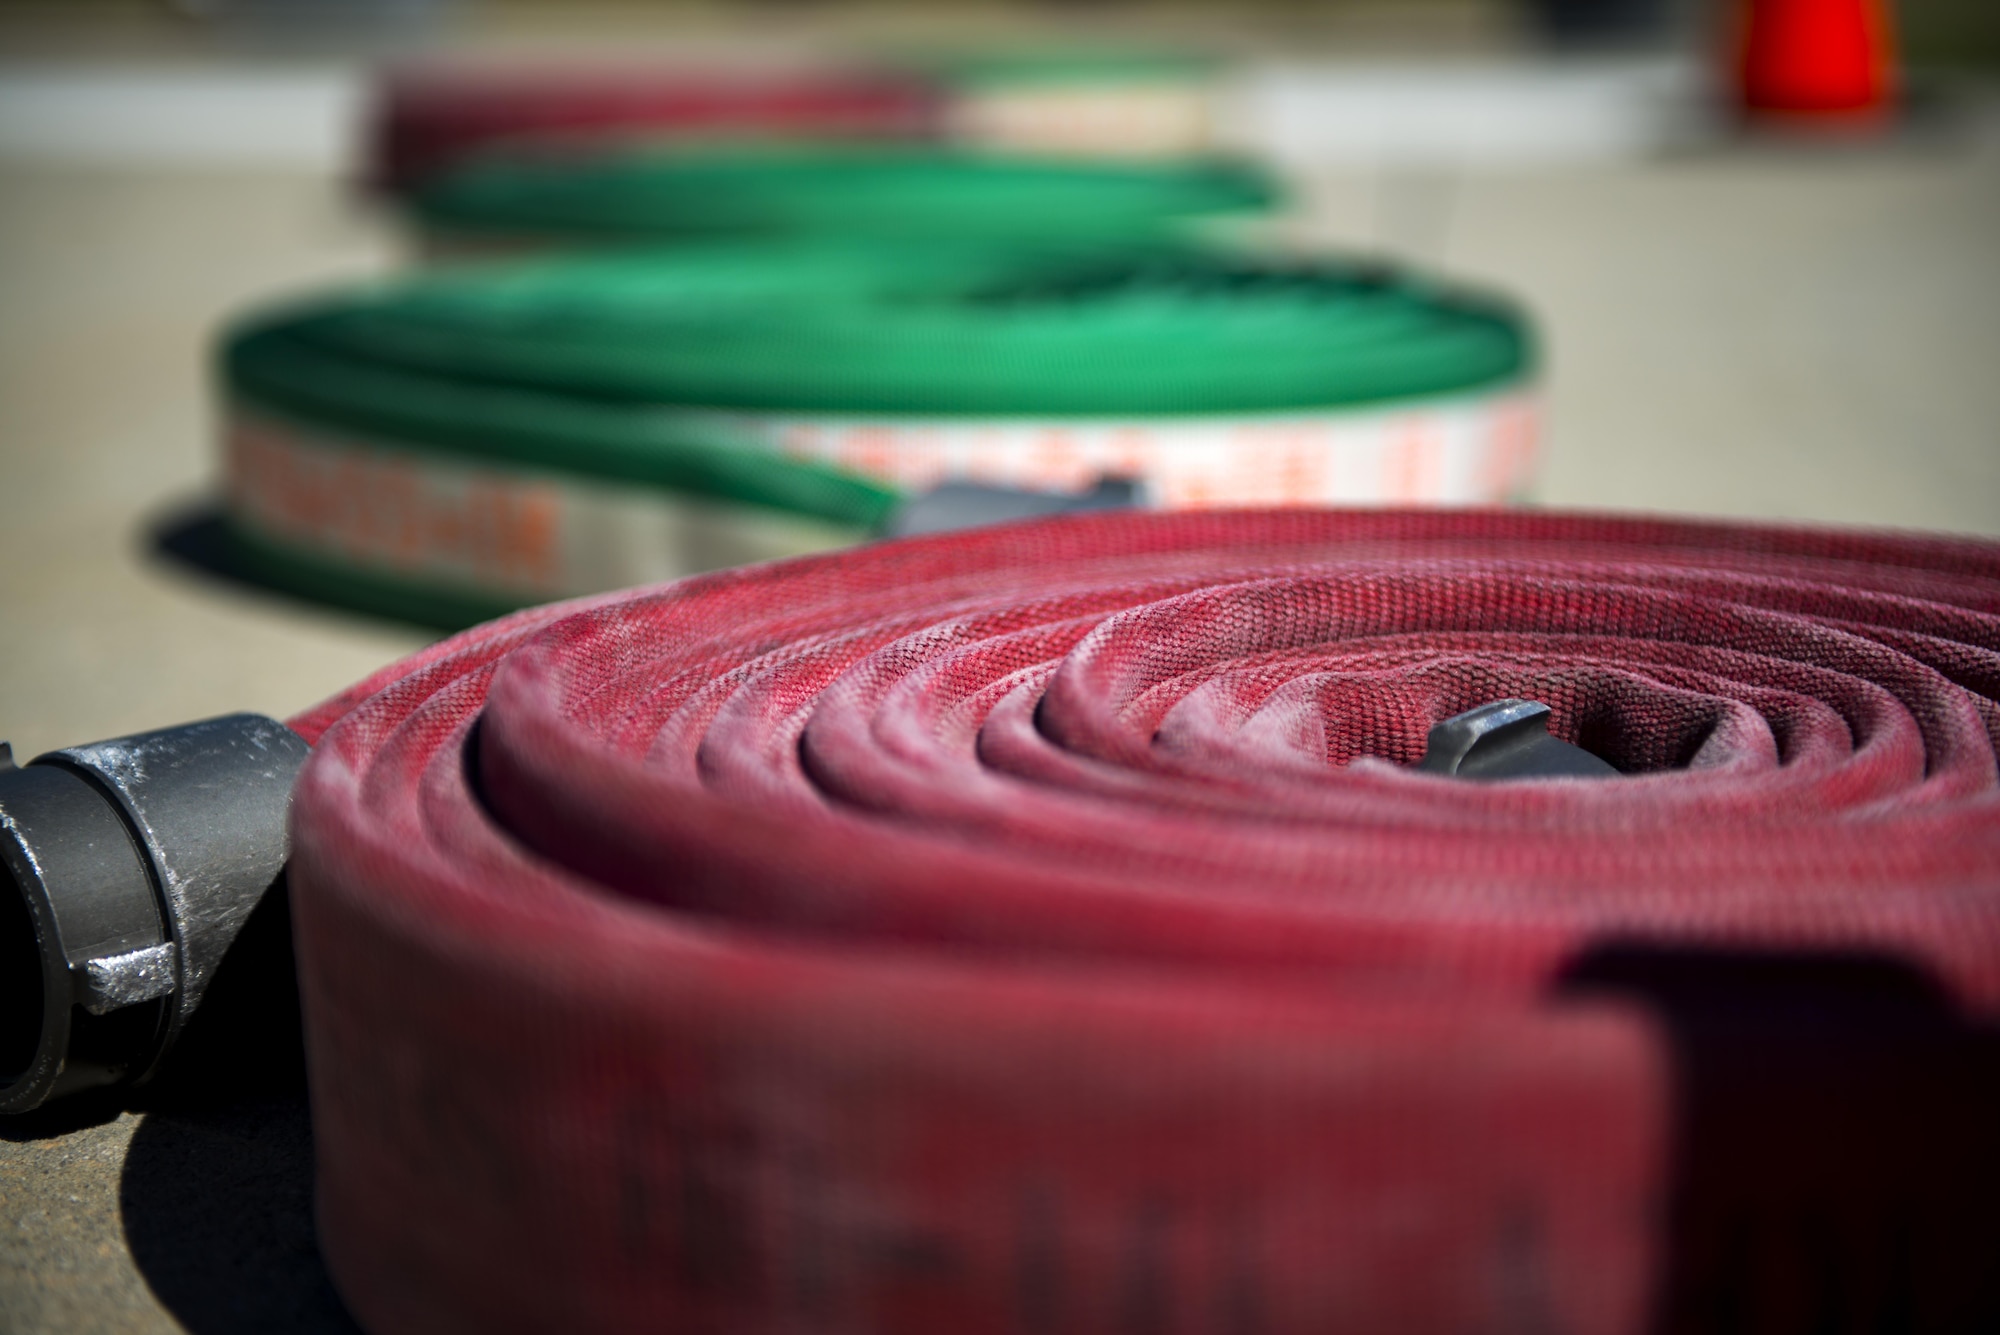 Fire hoses rest on the ground during the 2017 Fire Prevention Week Fire Muster, Oct. 13, 2017, at Moody Air Force Base, Ga. The 23d Civil Engineer Squadron fire department designed the muster to allow teams of Airmen to compete in several events, ranging from a hose roll to a fire truck pull. Event organizers wanted Airmen to experience being a firefighter in a way that got people active. (U.S. Air Force photo by Airman 1st Class Erick Requadt)